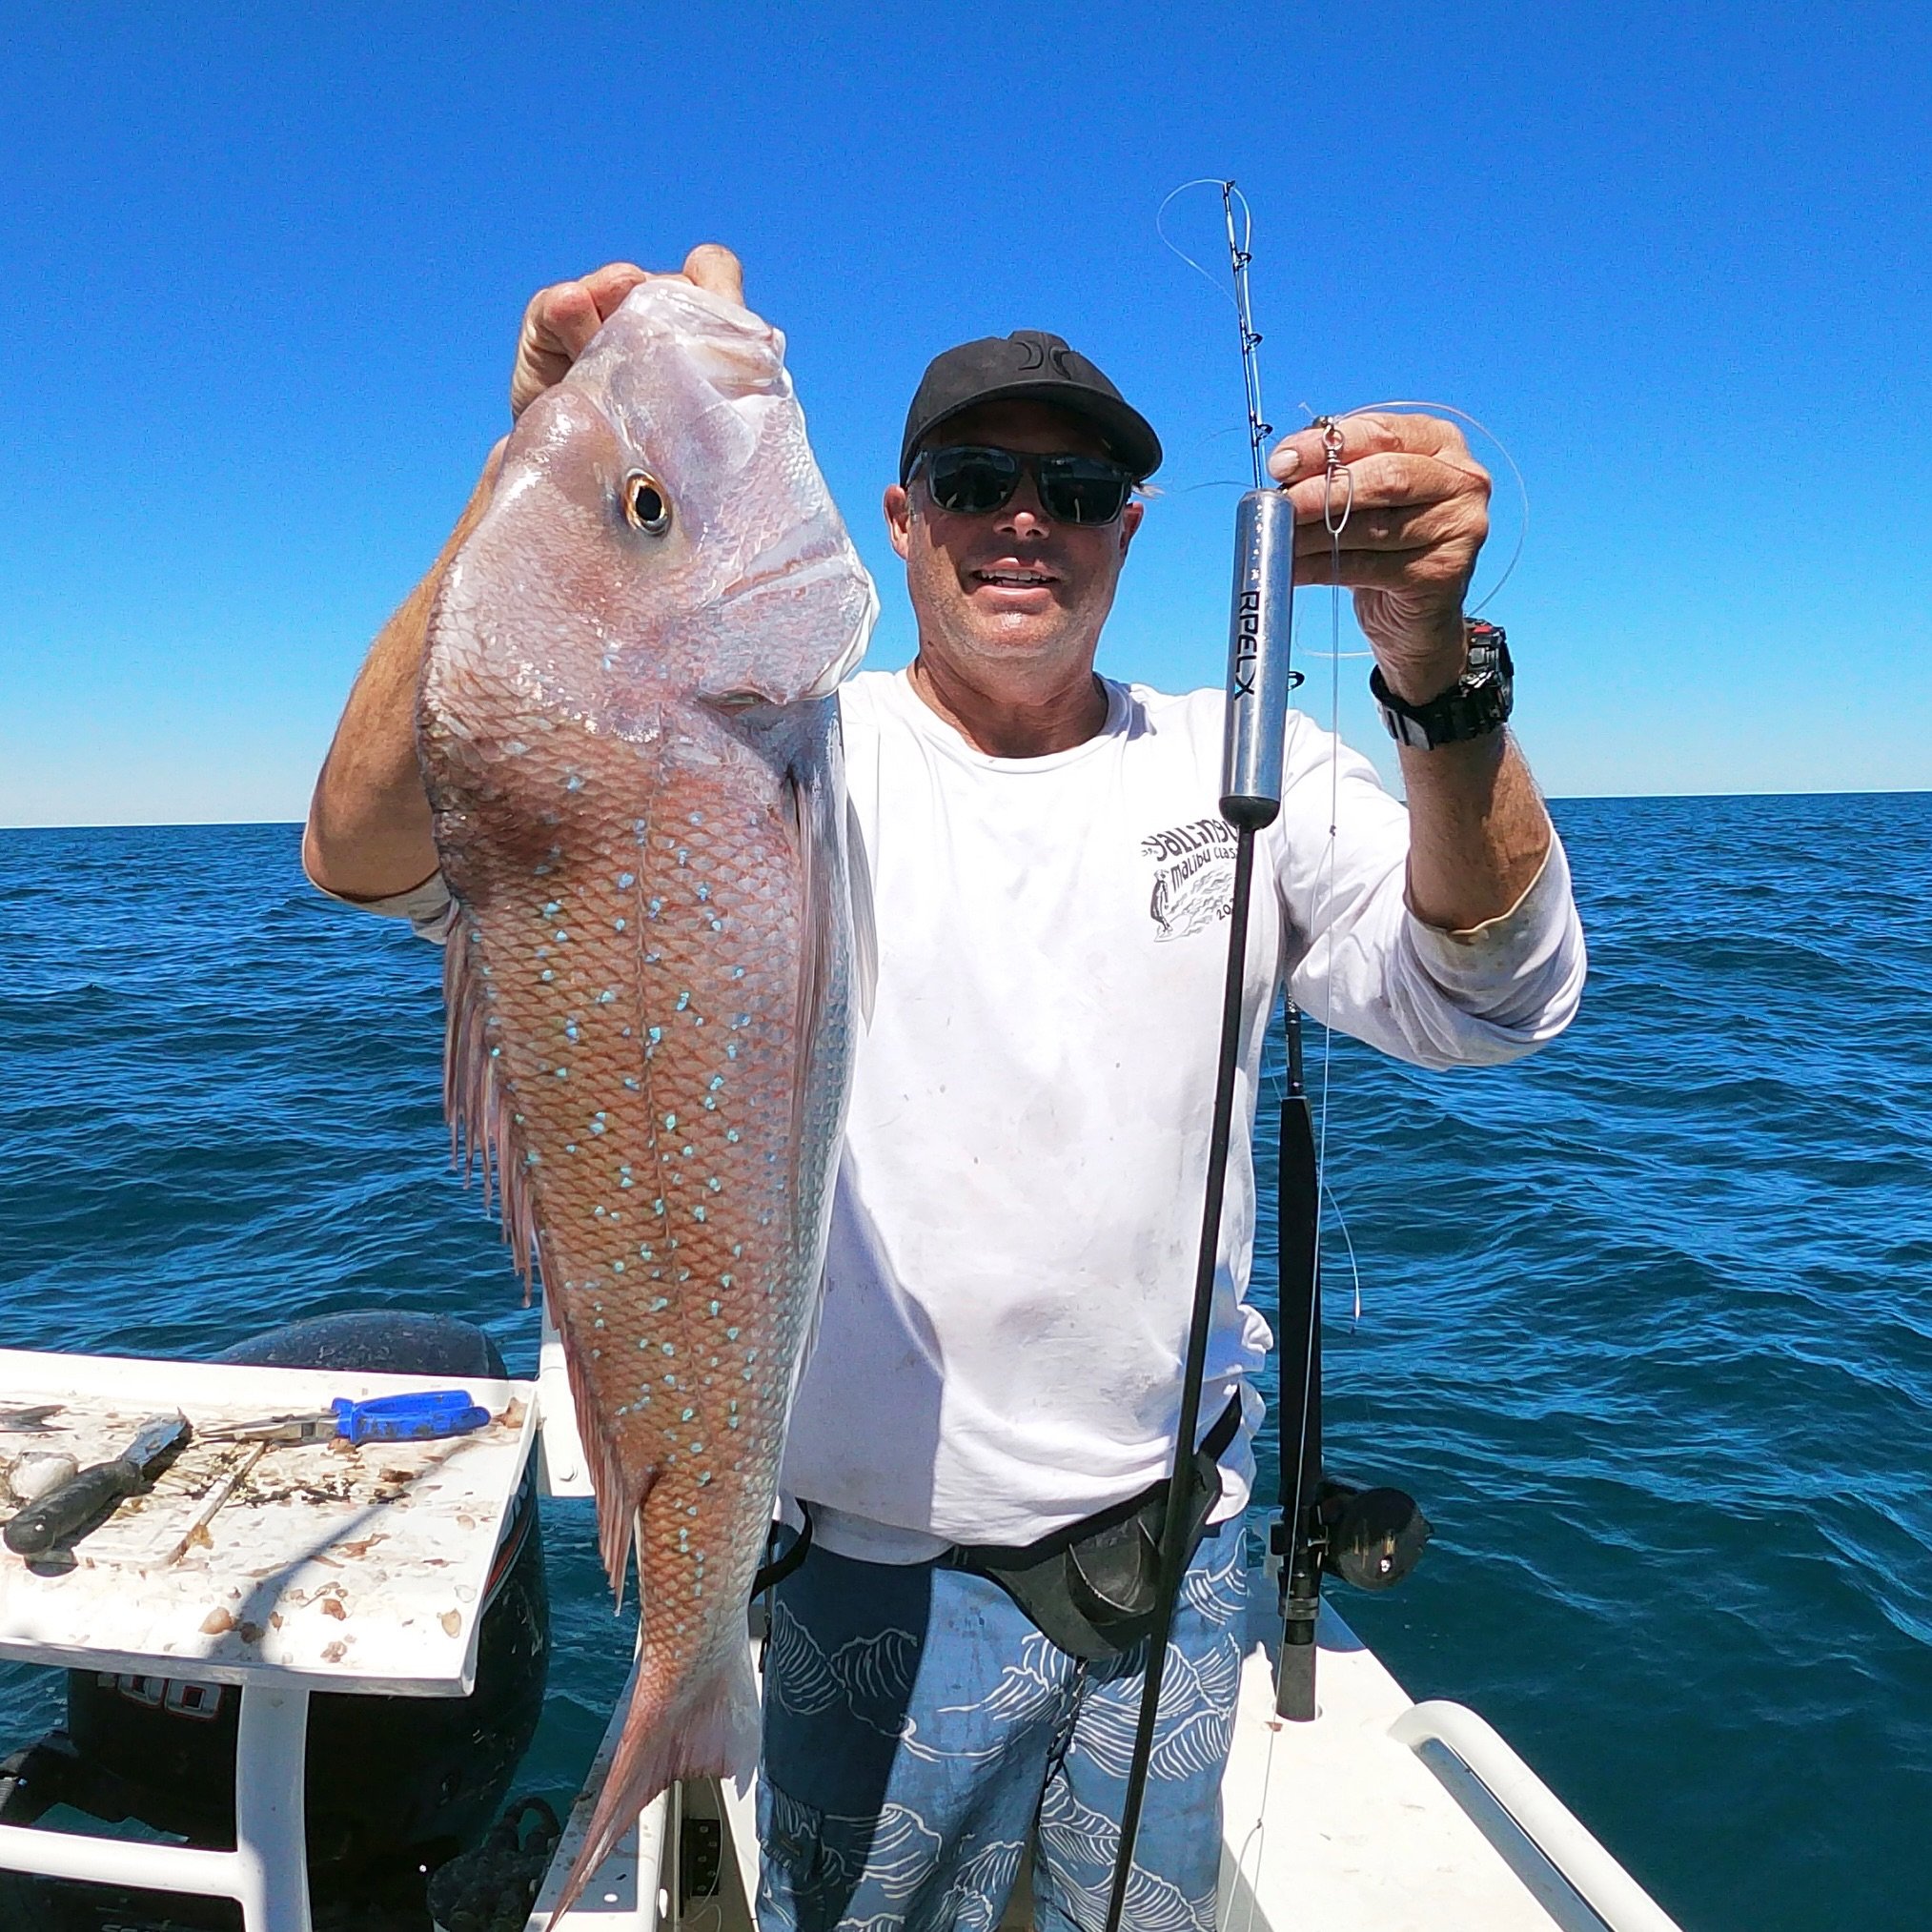 Coupla nice pinkies landed through the sharks using the latest shark deterrent by rpelx off WA mid west coast! 🎣

#sharkdeterrent #fishing #fishingaustralia